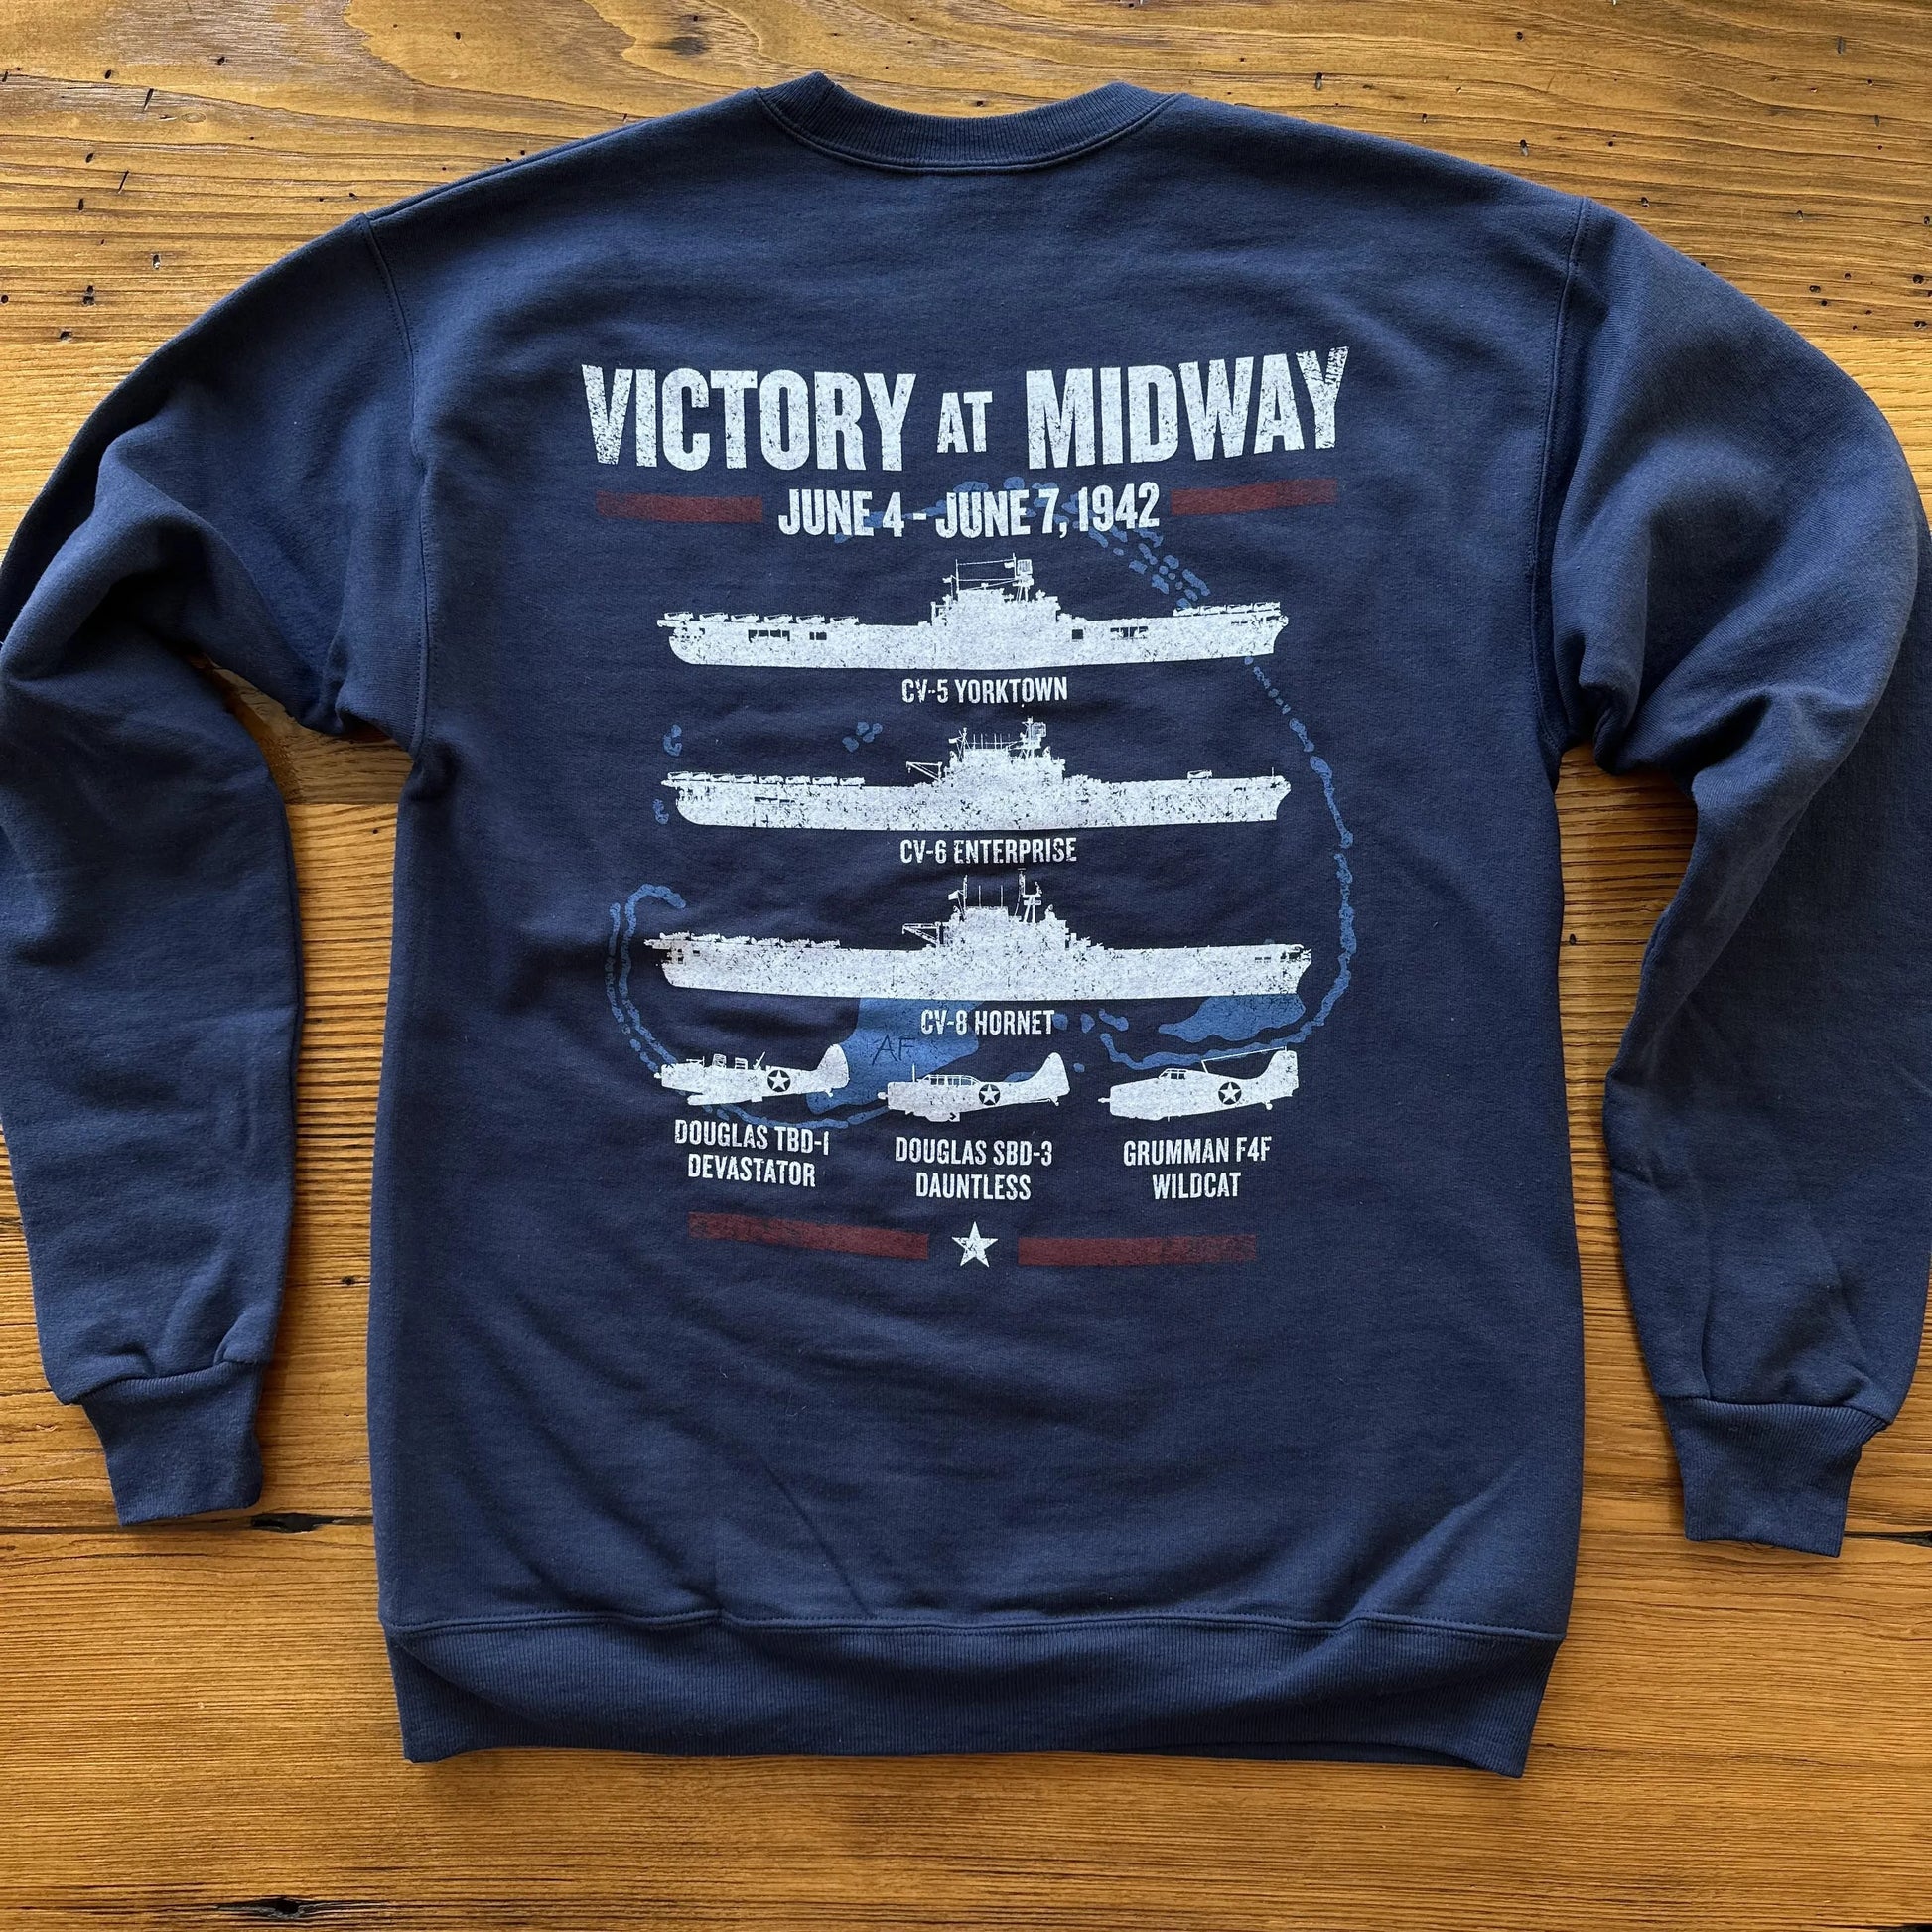 Back of "Victory at Midway" Crewneck sweatshirt from The History List store